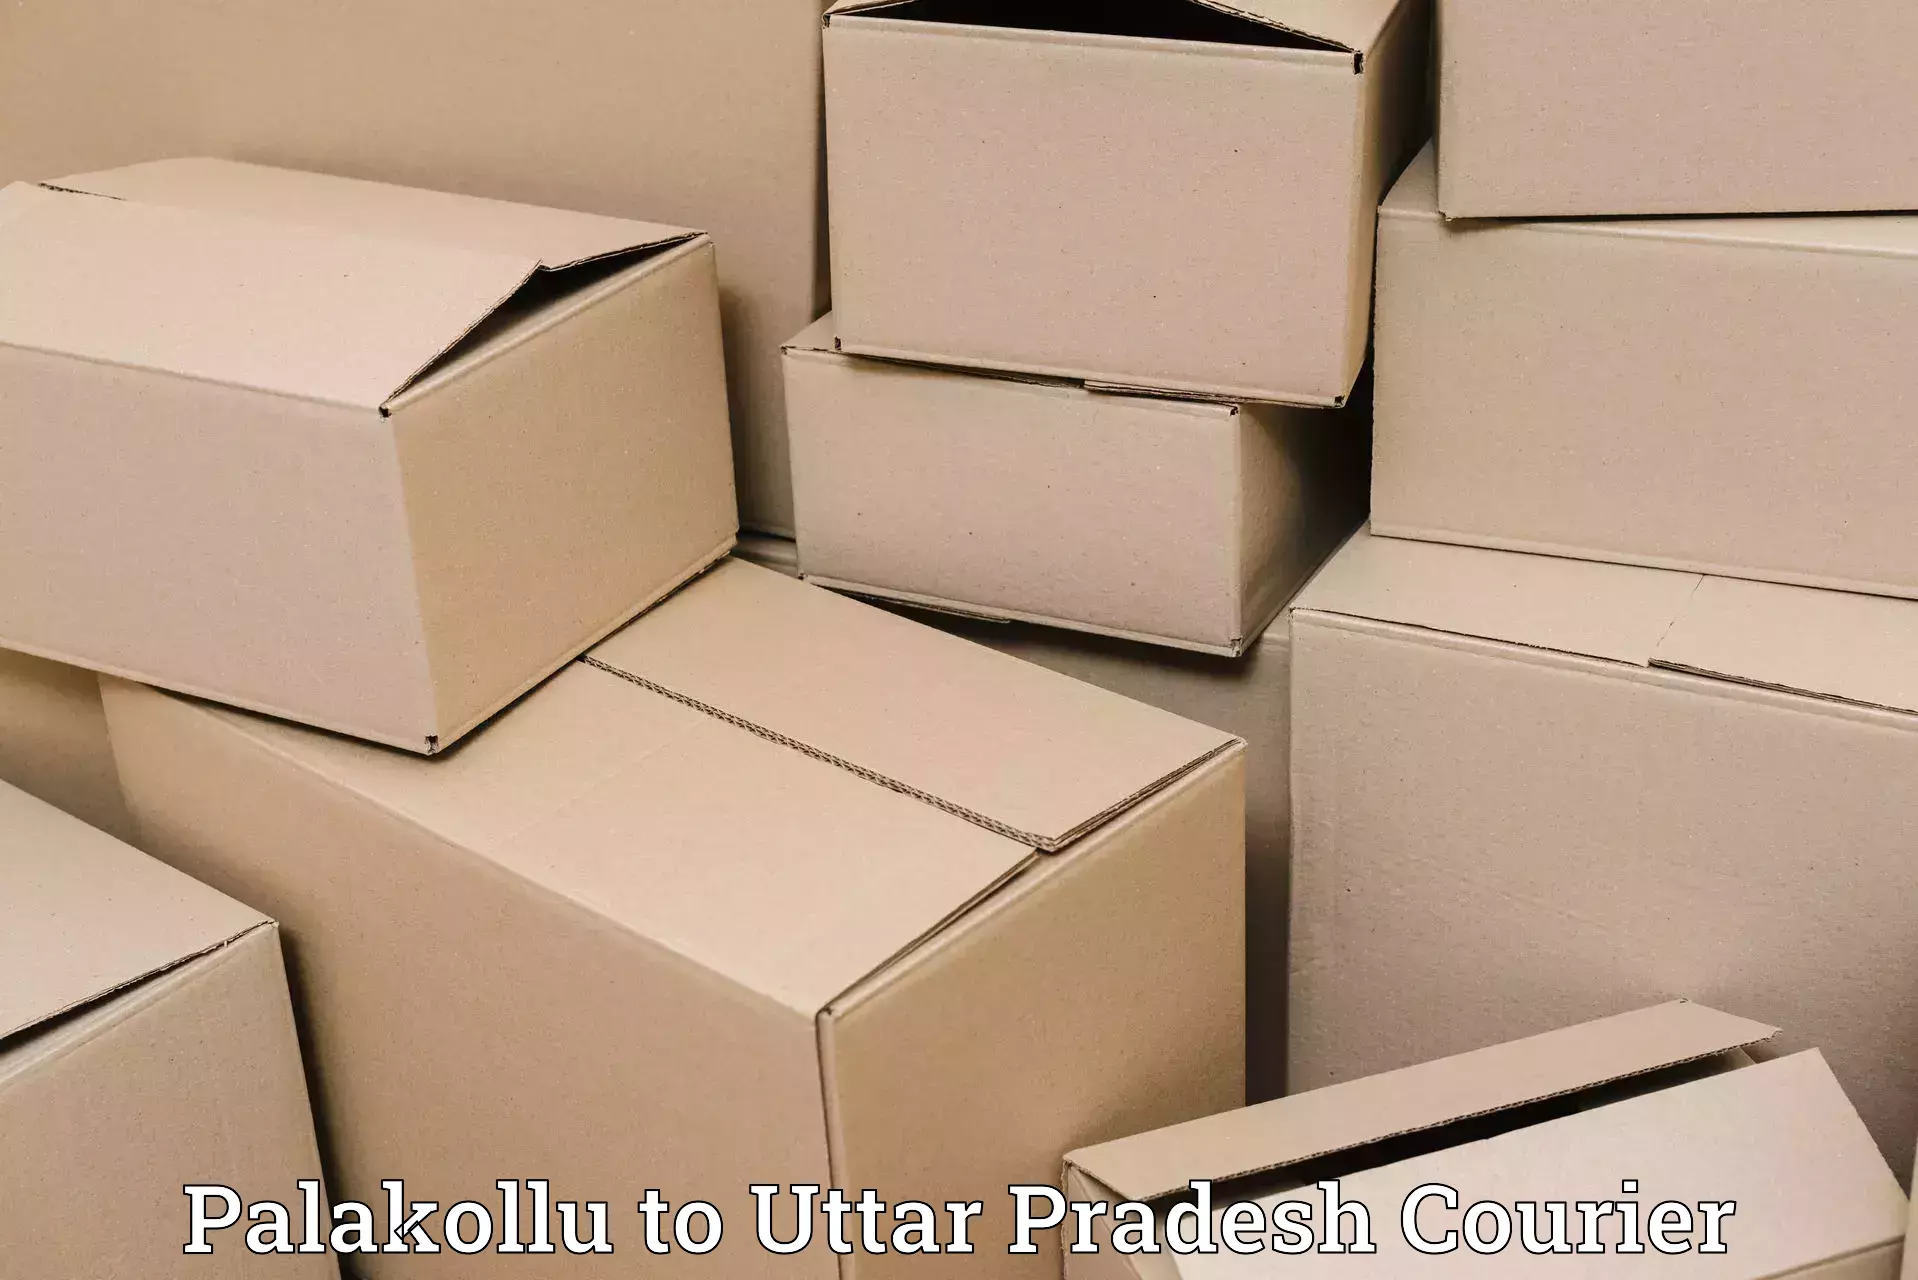 Round-the-clock parcel delivery in Palakollu to Khadda